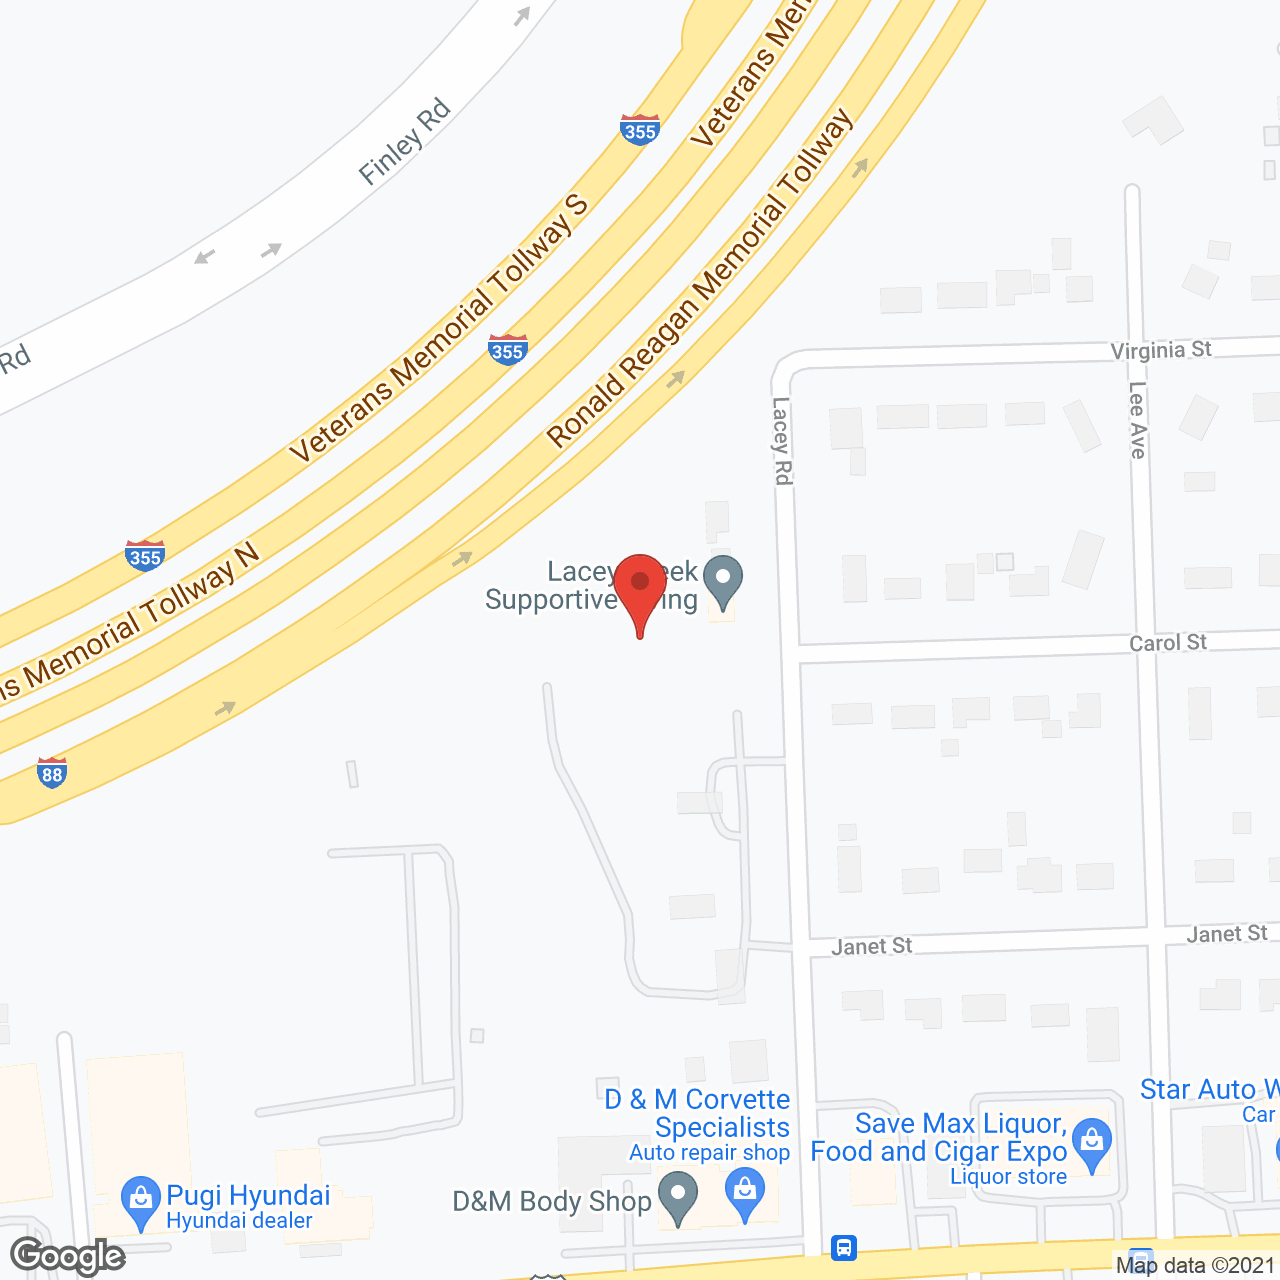 Lacey Creek Supportive Living in google map